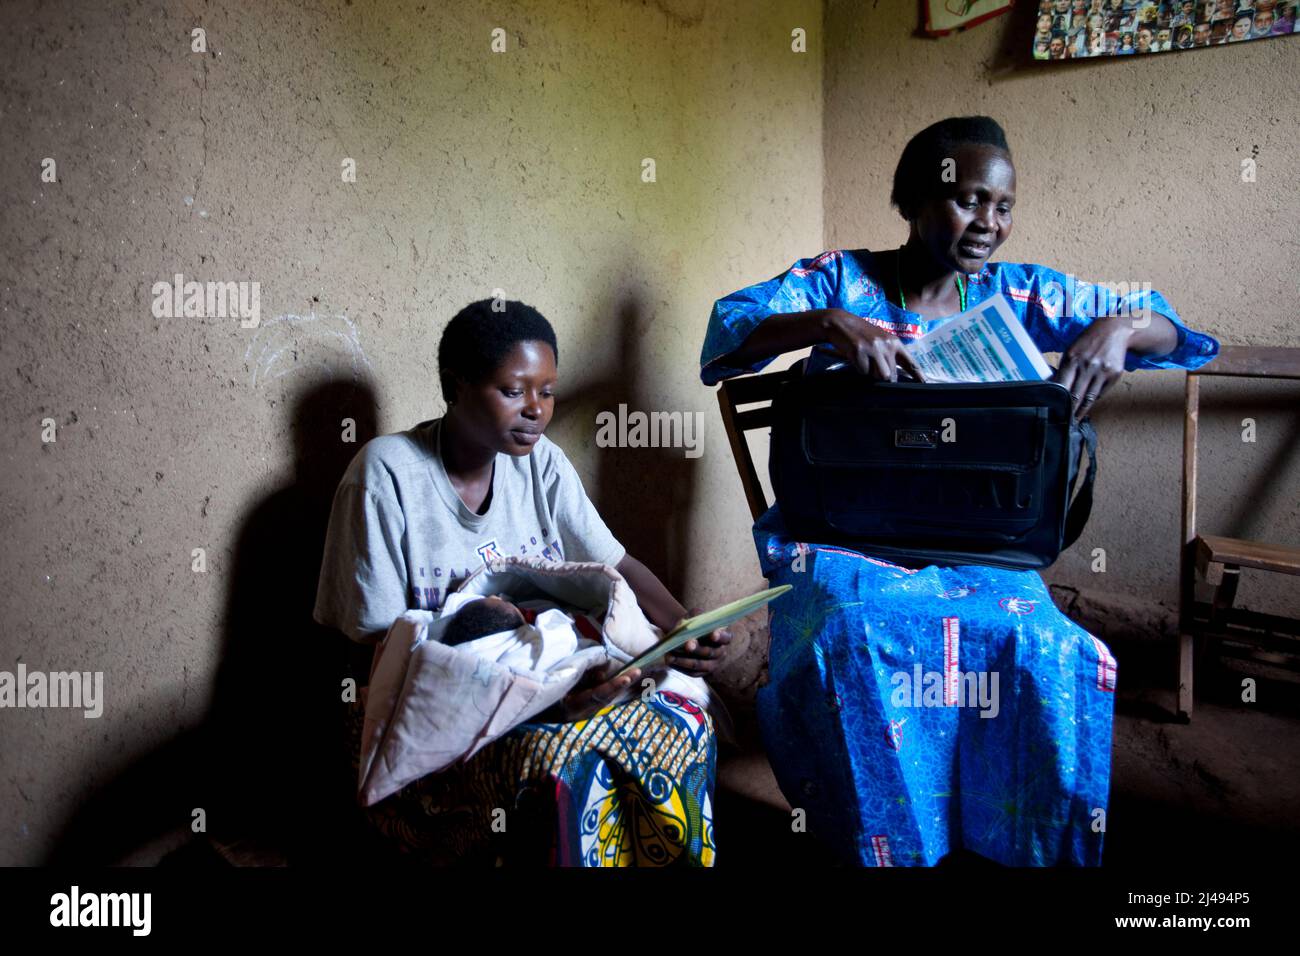 Paskazi Mukasangwa, a community health worker for maternal and new-born health, during a routine post-natal visit, Mbazi sector, Huye disrict.   Vestine Niyonsaba, 25, gave birth to her son four days before.  Photograph by Mike Goldwater Stock Photo